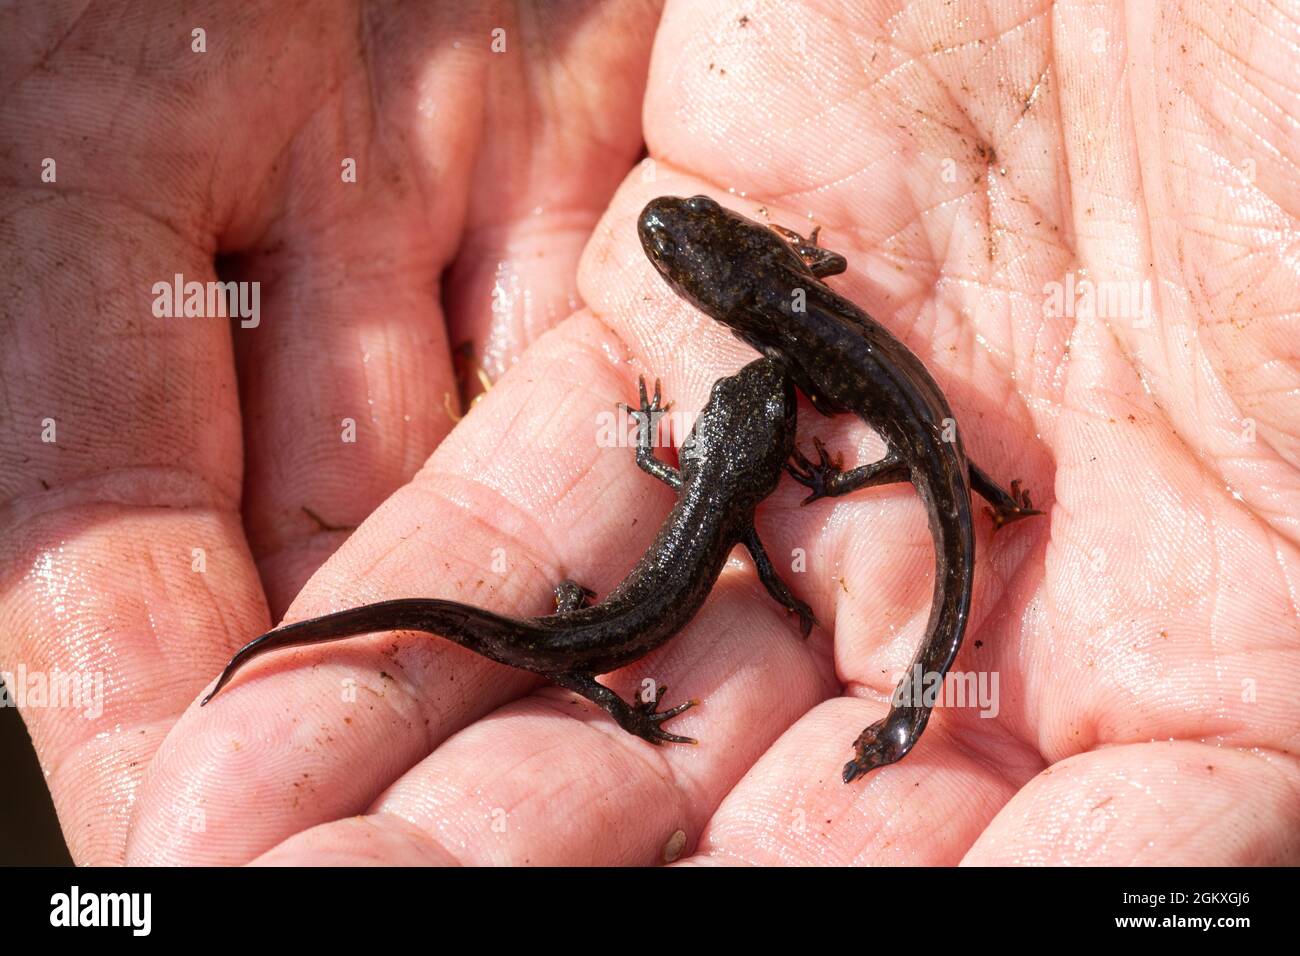 Great crested newt efts (Triturus cristatus) in the hand, UK Stock Photo